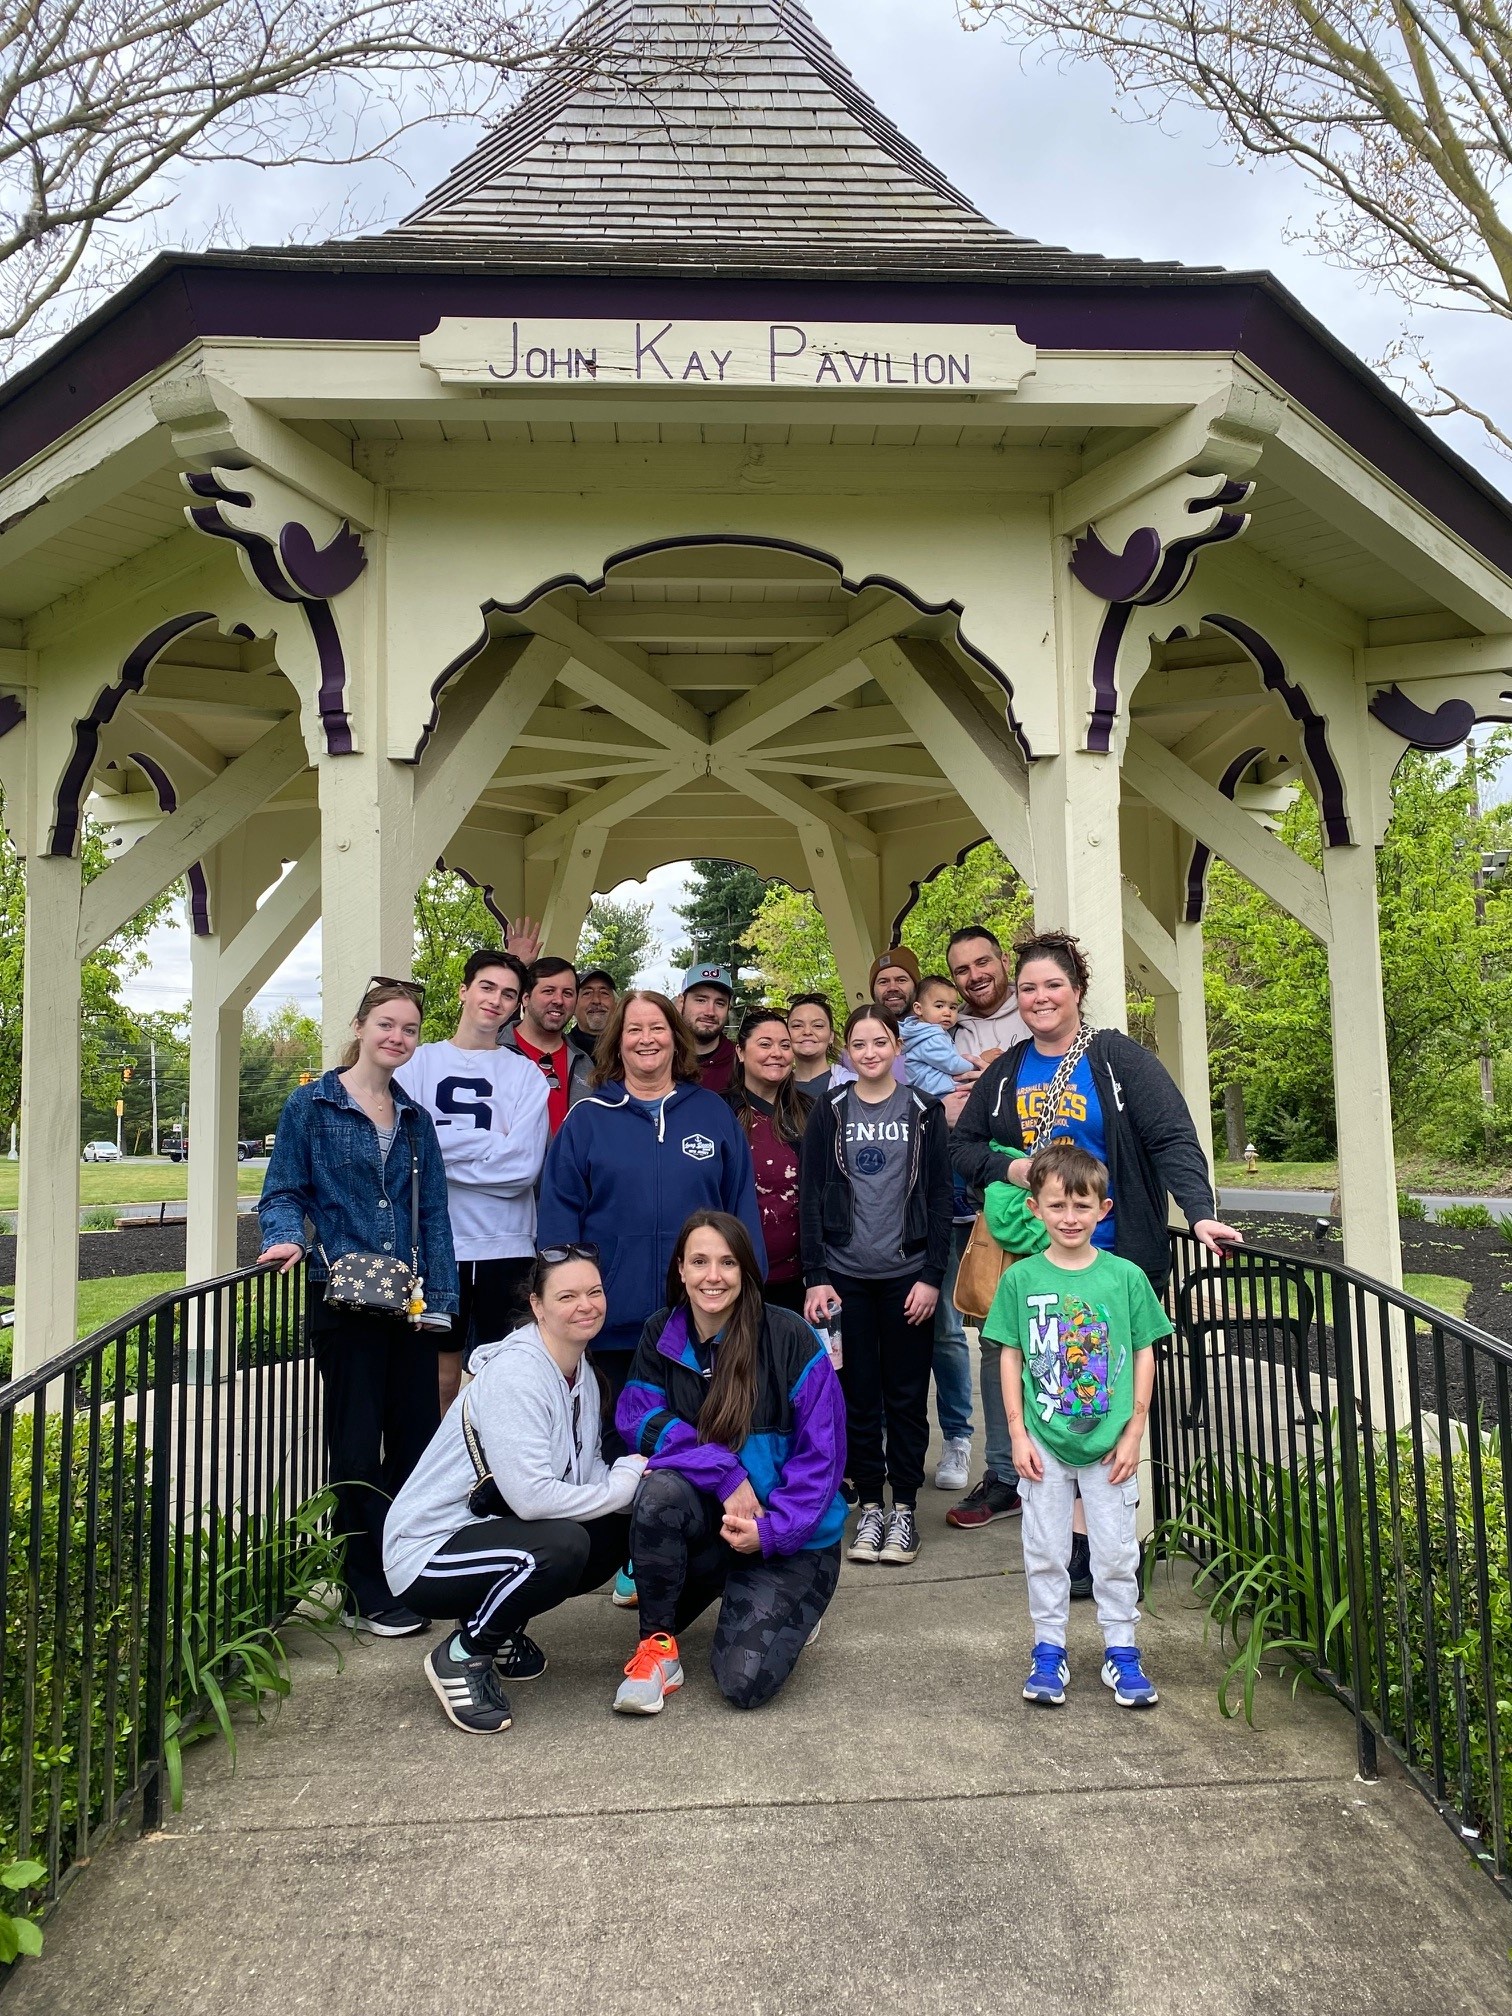 Families at the John Kay Pavilion who participated in the Find Their Footing Mile Walk in Cherry Hill NJ